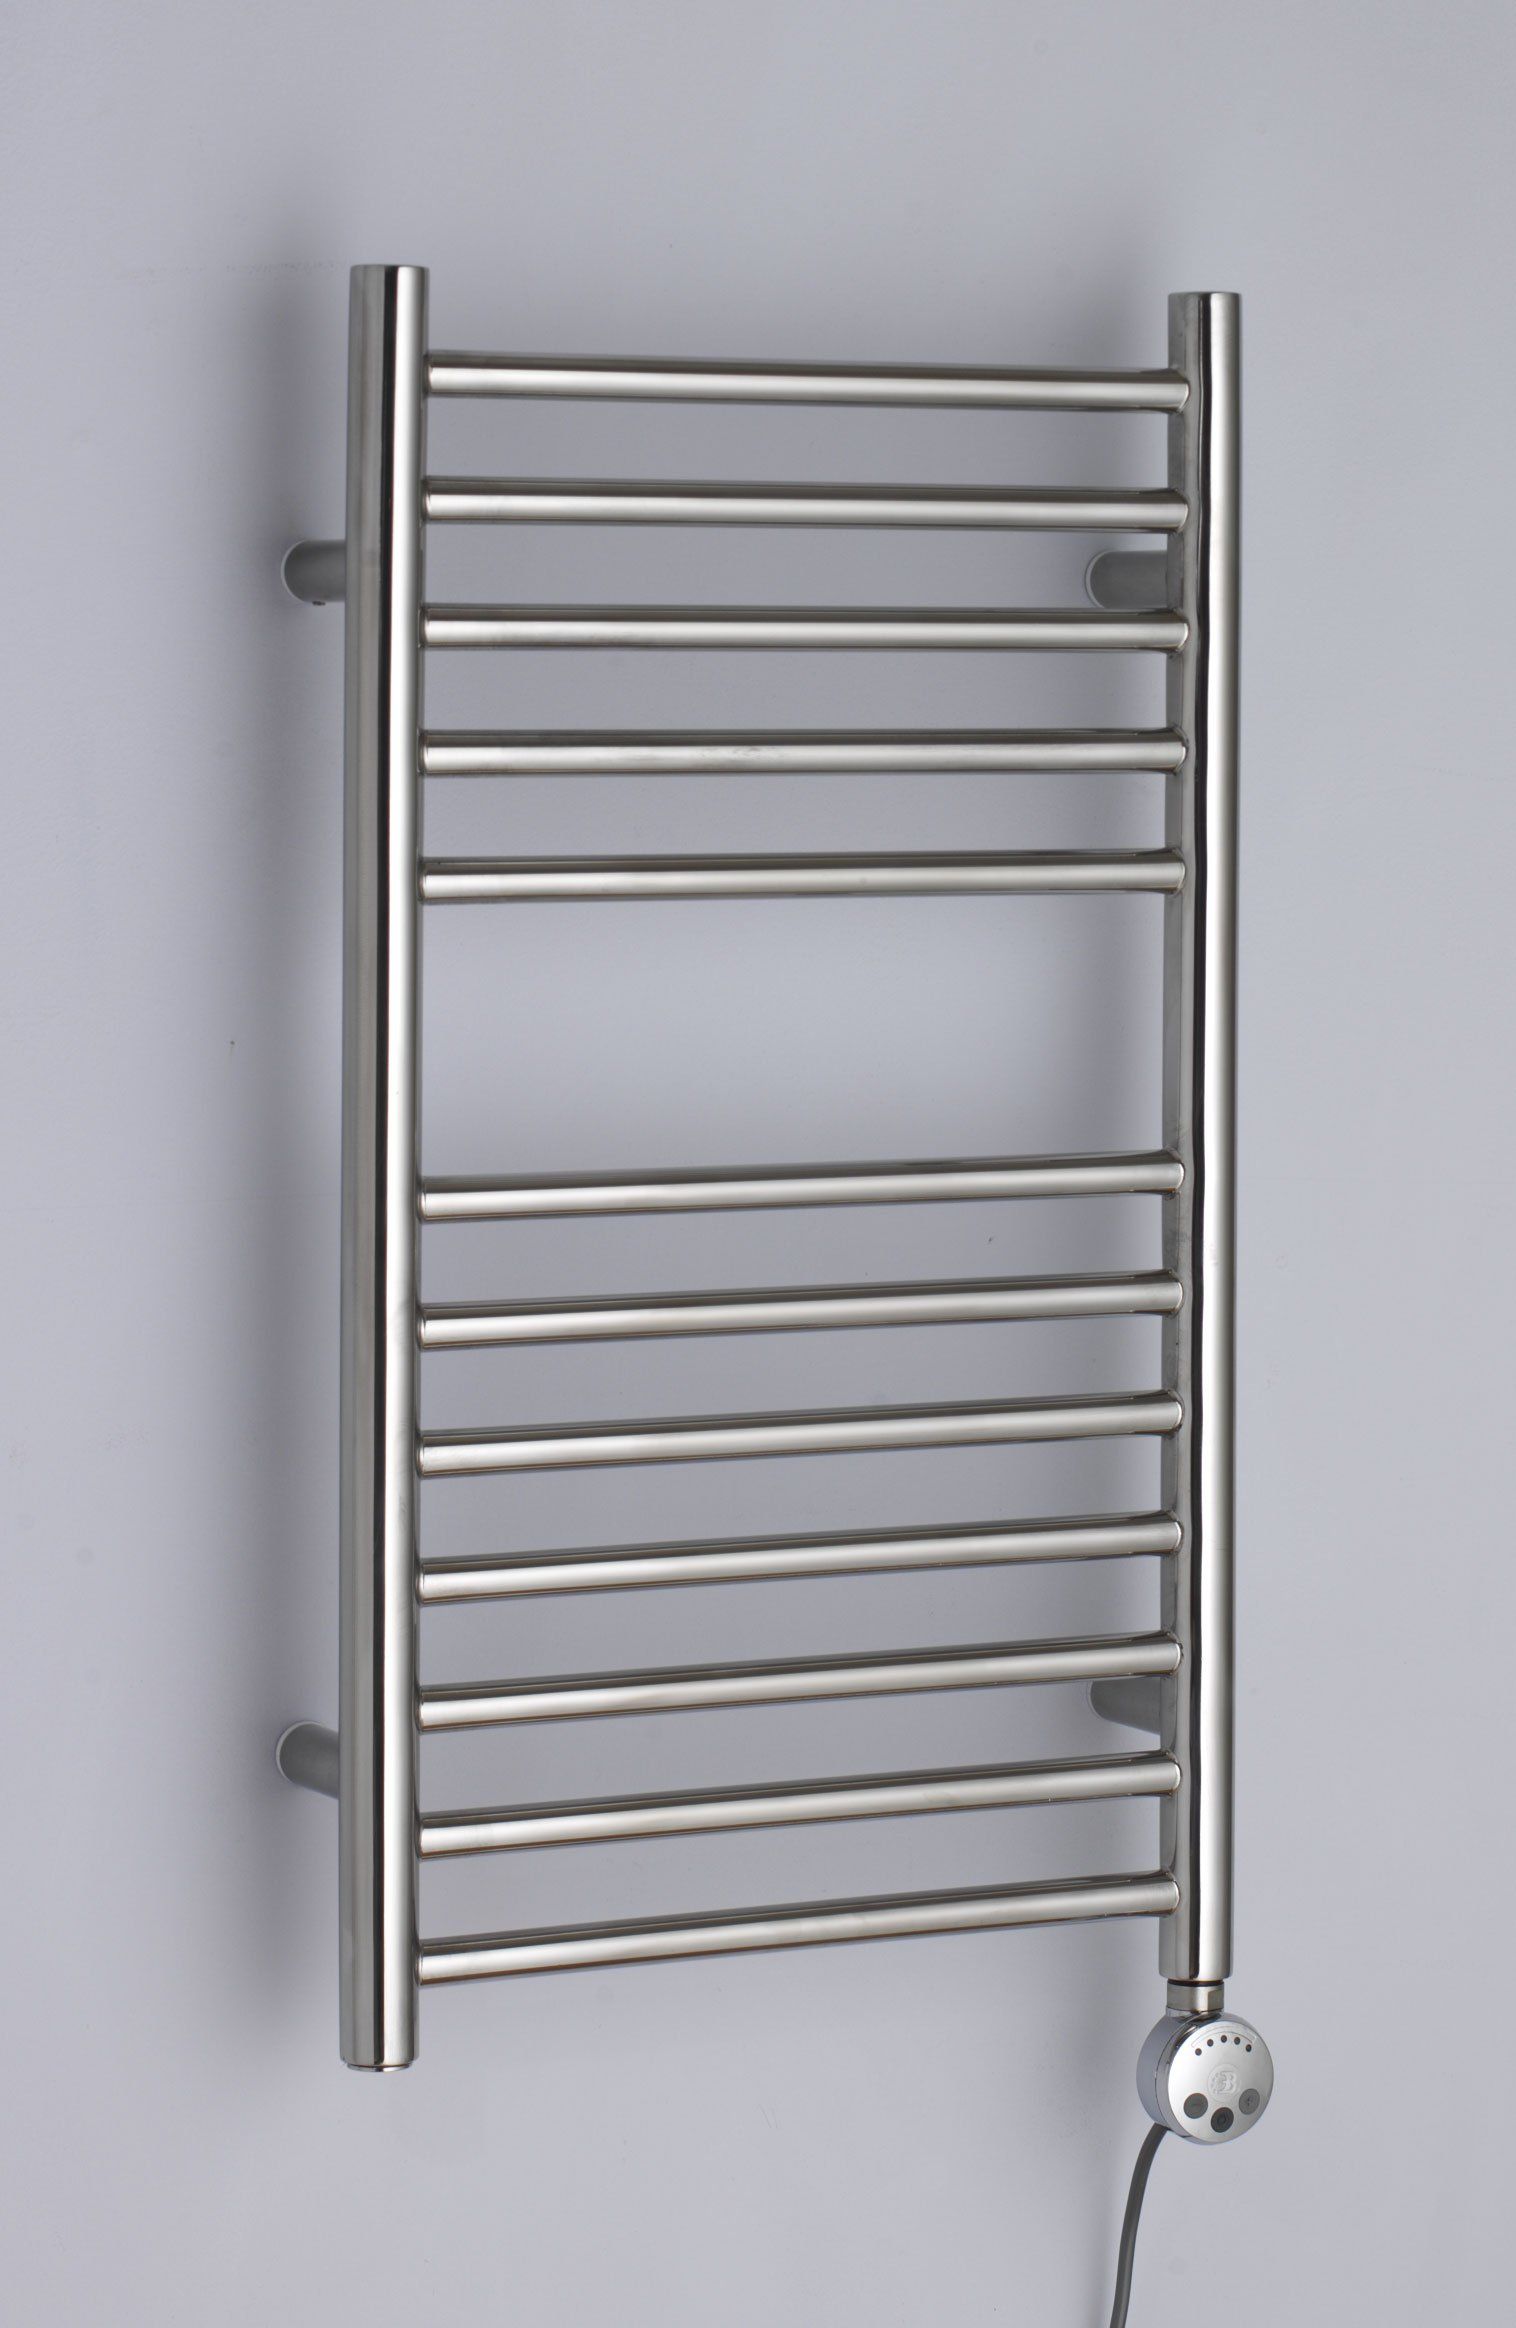 Stainless steel electric heated towel rail